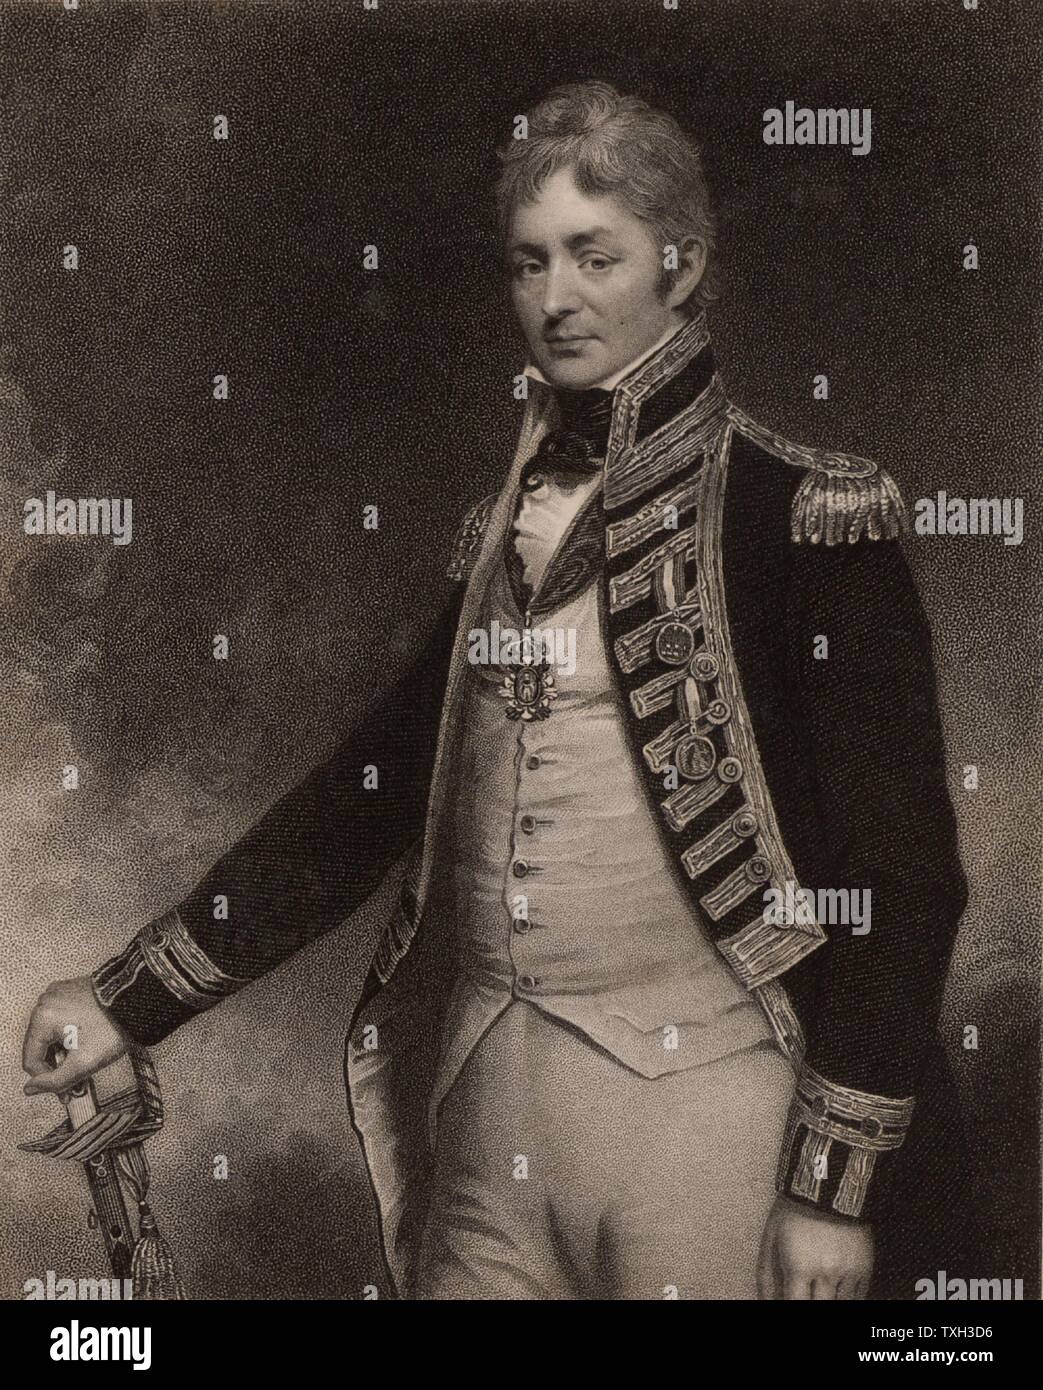 Thomas Troubridge (c1758-1807) British naval officer who rose to the rank of Rear-Admiral. Entered the Royal Navy in 1773, served in the East Indies, at the Battle of Cape St Vincent, and Aboukir Bay.  In 1807 his ship foundered of Madagascar and he and his whole crew were lost.  From 'National Portrait Gallery' by James Jerdan (London, 1830). Stock Photo